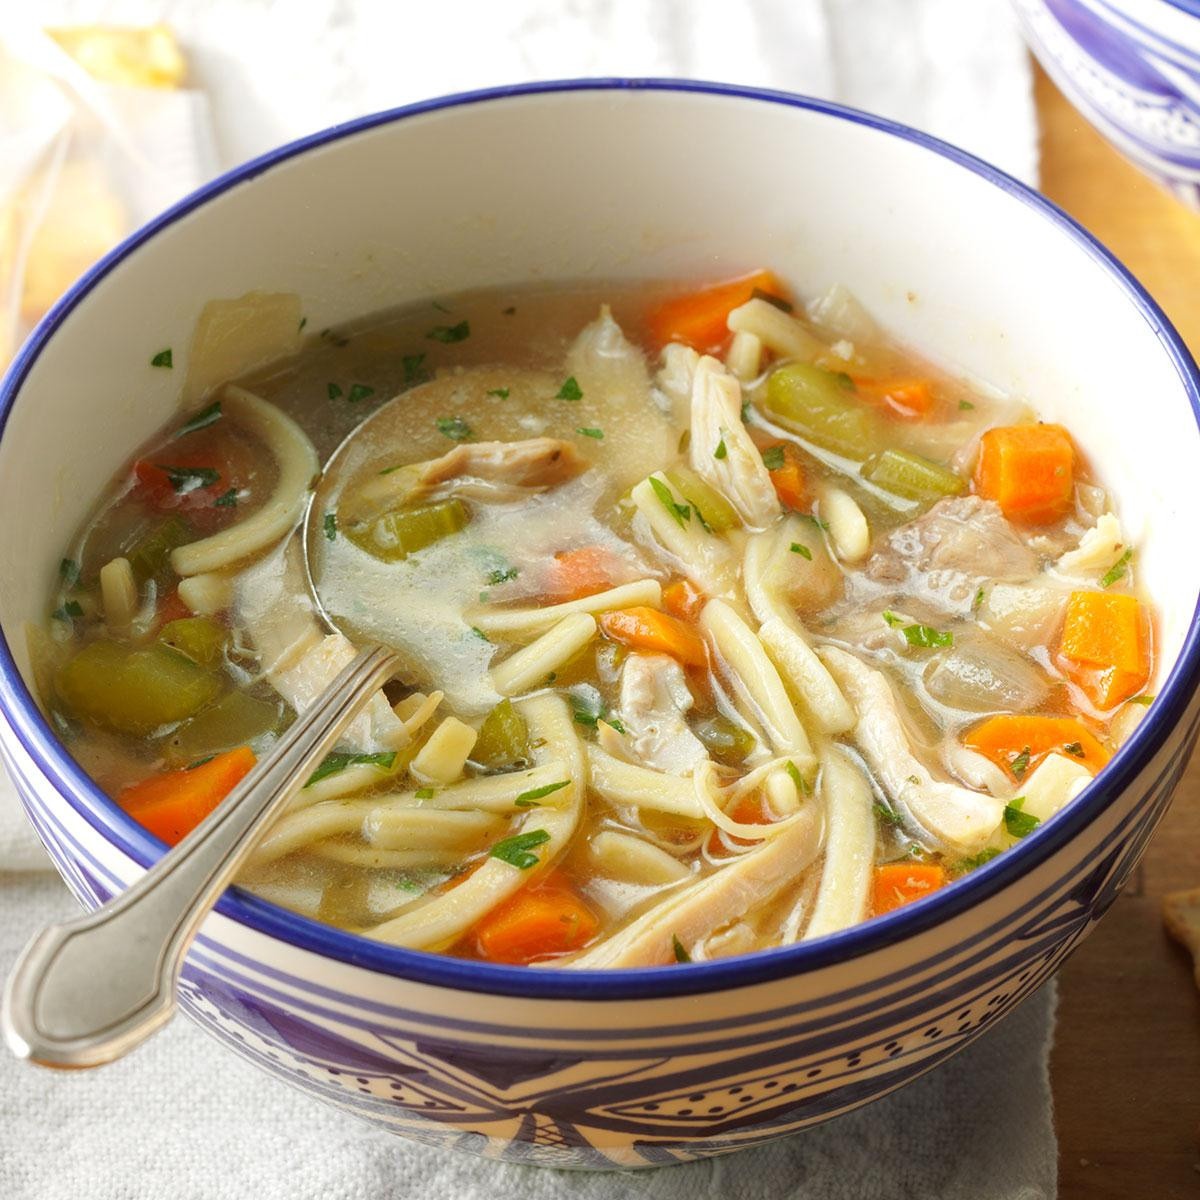 Healthy Chicken Noodle Soup Recipe
 The Ultimate Chicken Noodle Soup Recipe